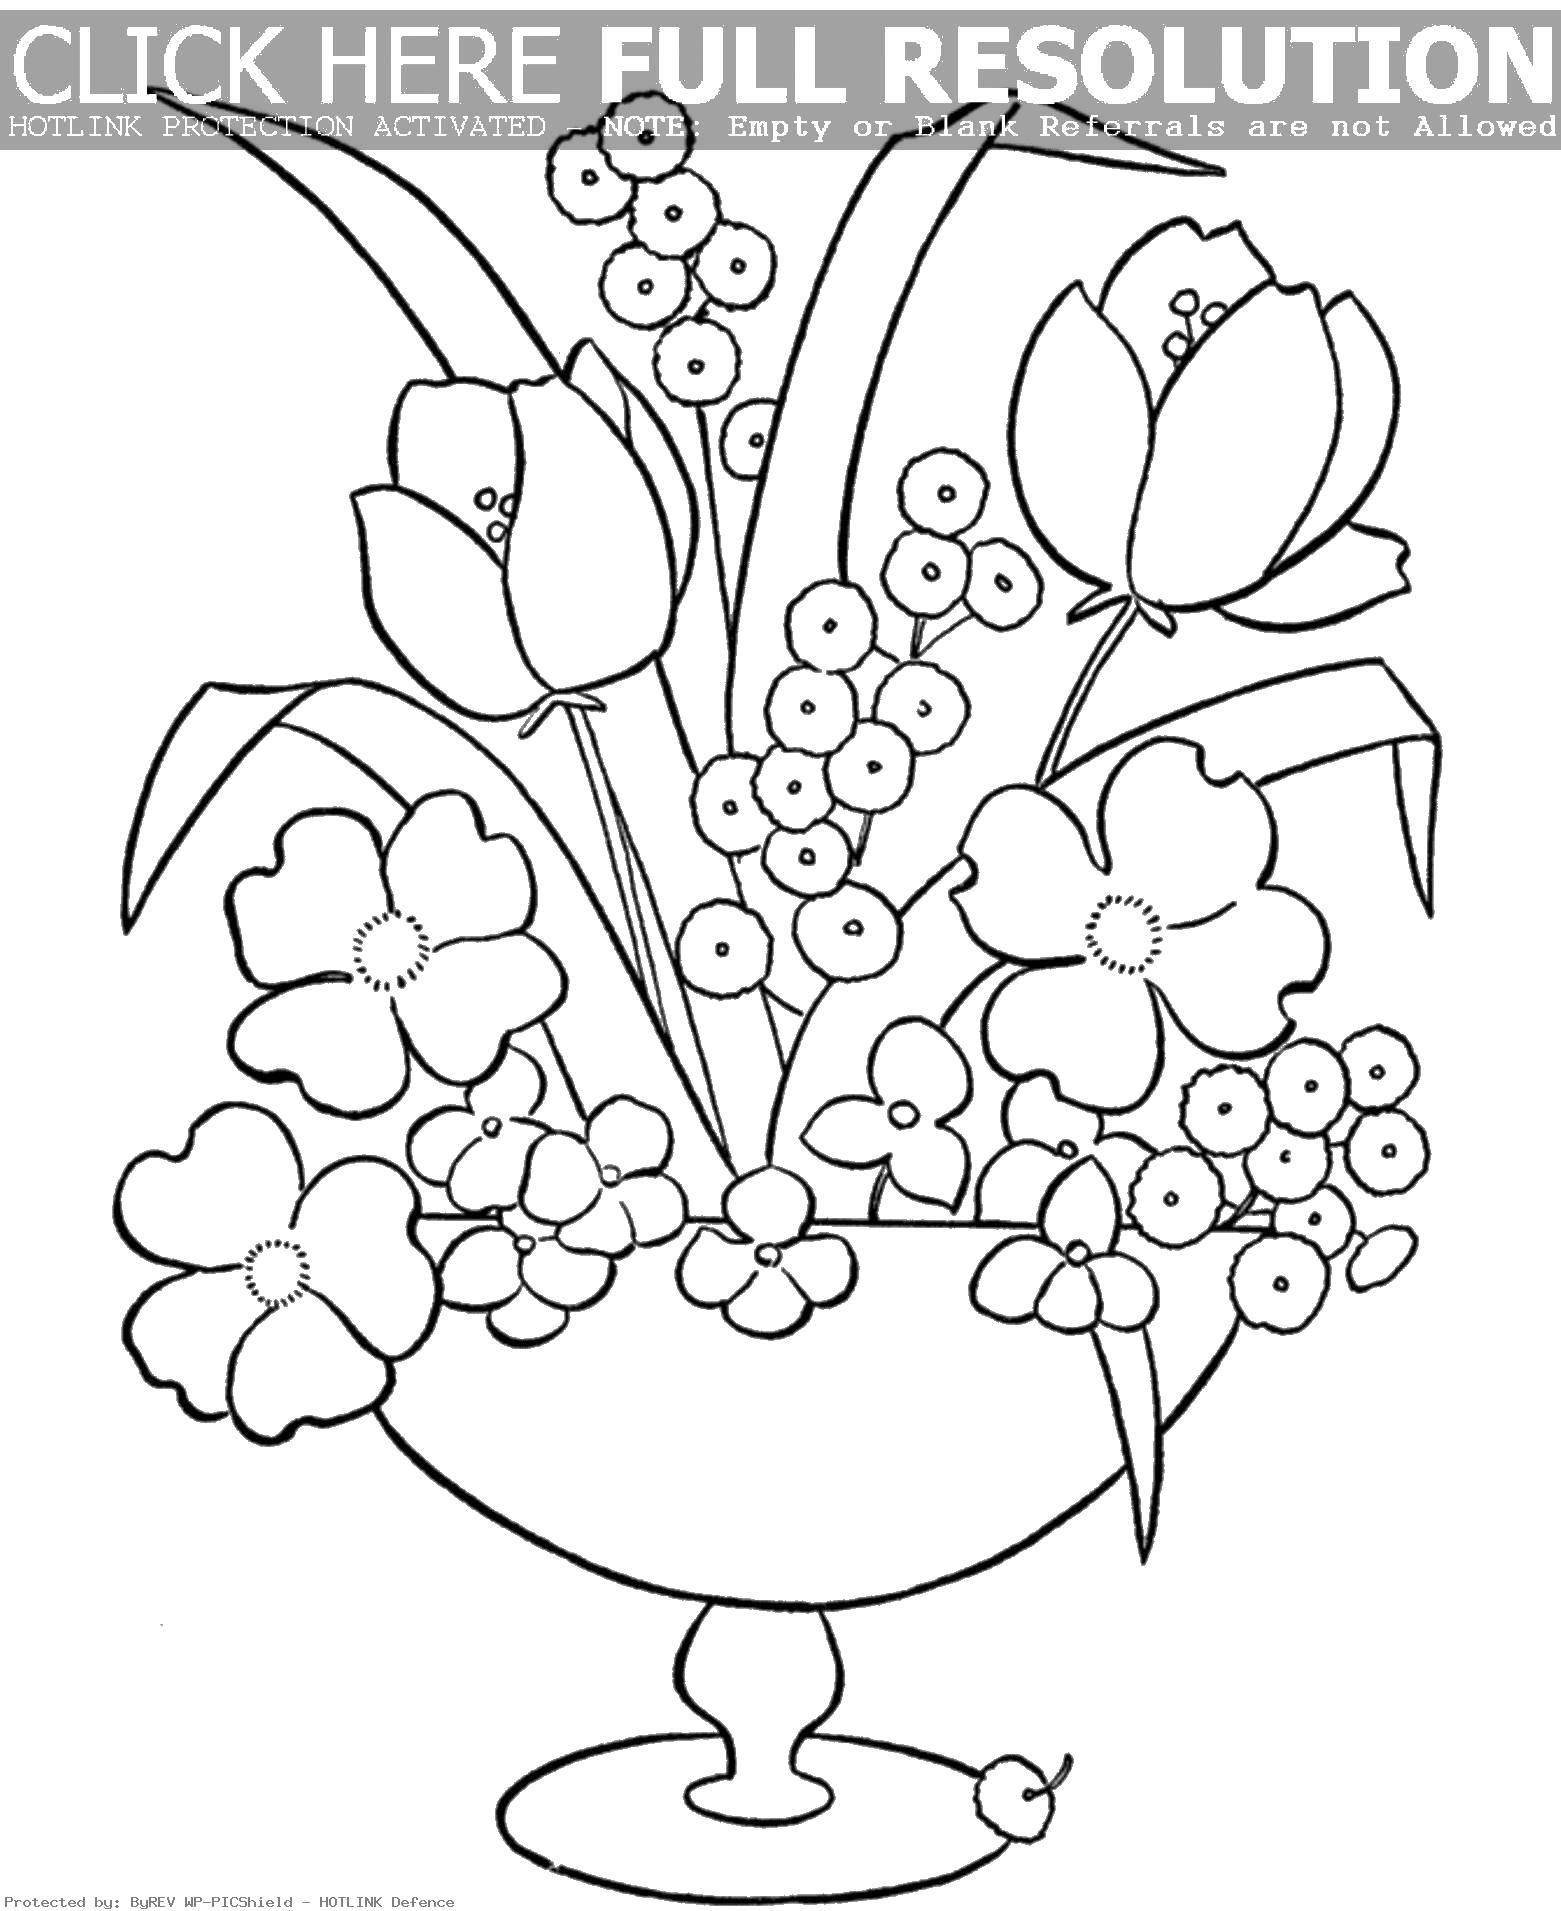 Coloring Bowl with flowers. Category Vase. Tags:  vase, bouquet, flowers.